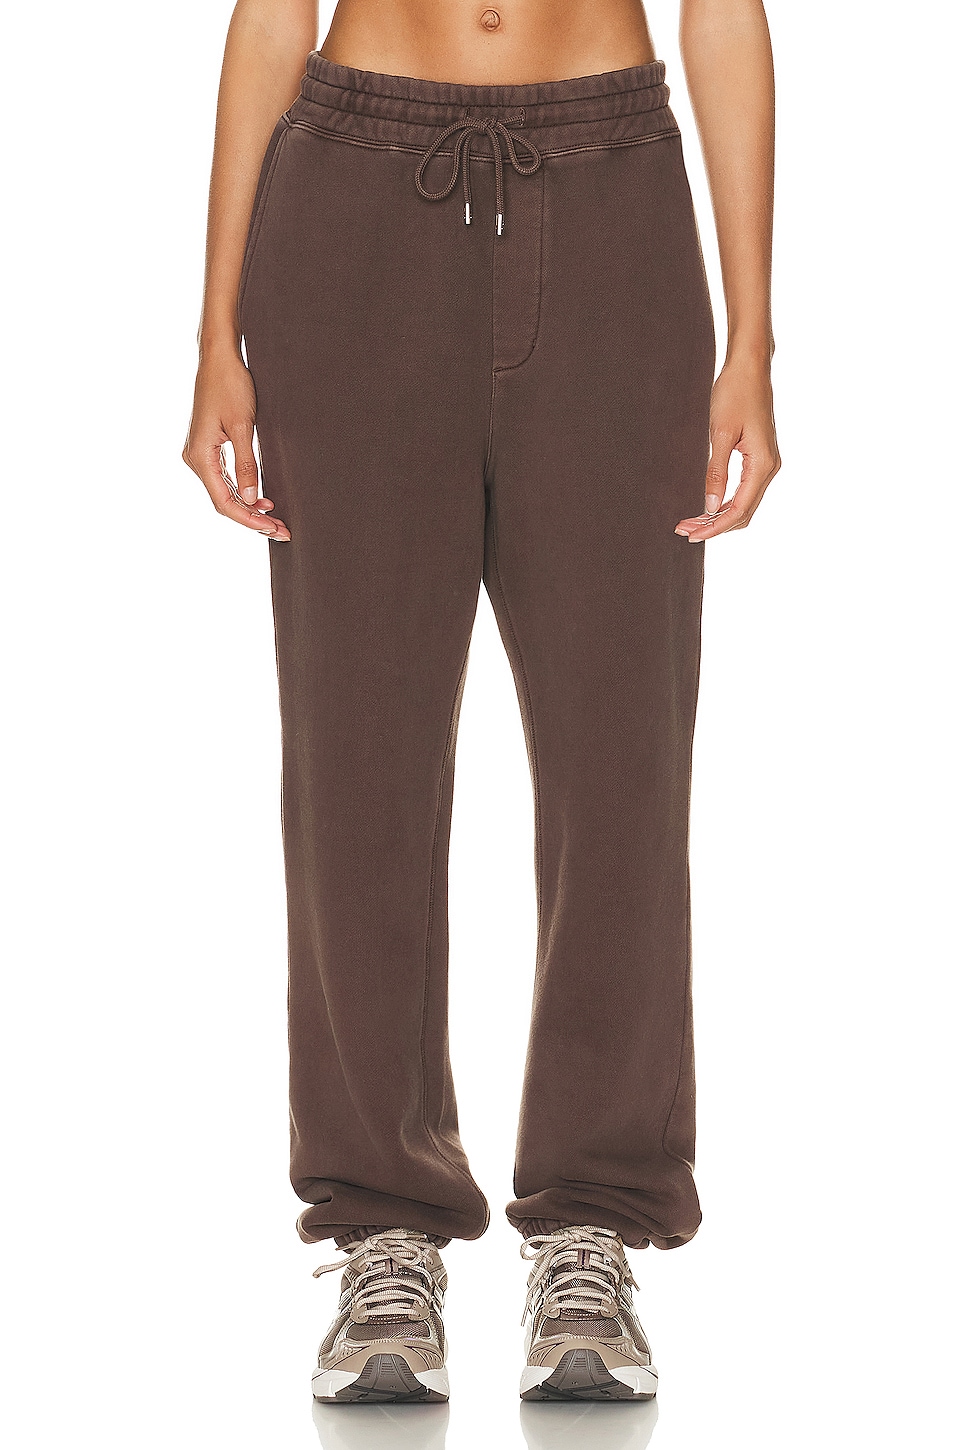 Image 1 of WAO The Fleece Jogger in brown